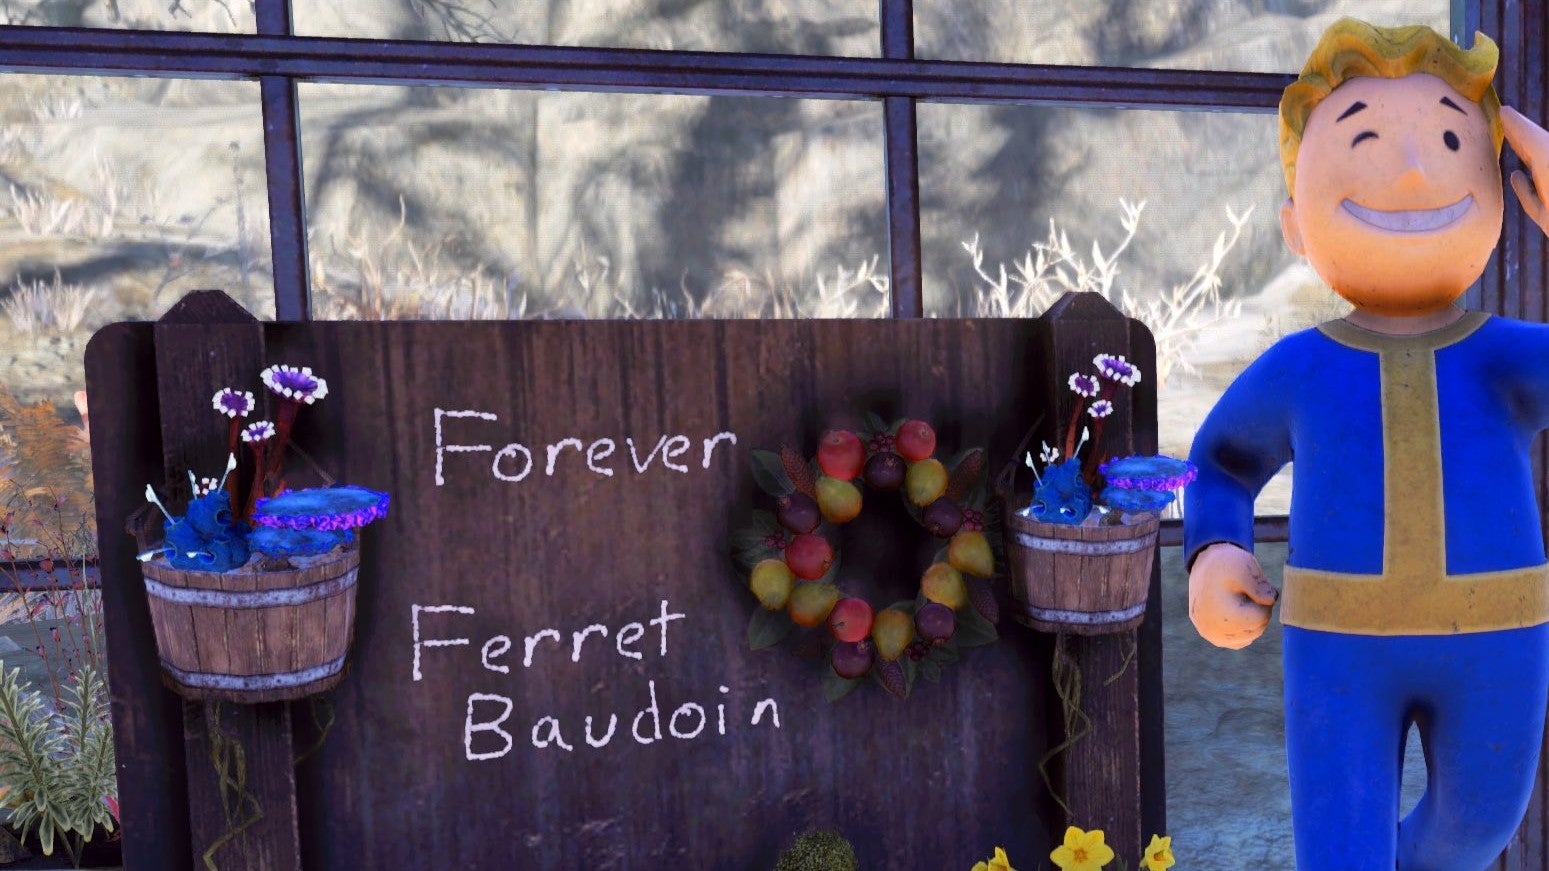 Image for Fans leave touching in-game tributes to Fallout 76 lead designer Eric "Ferret" Baudoin